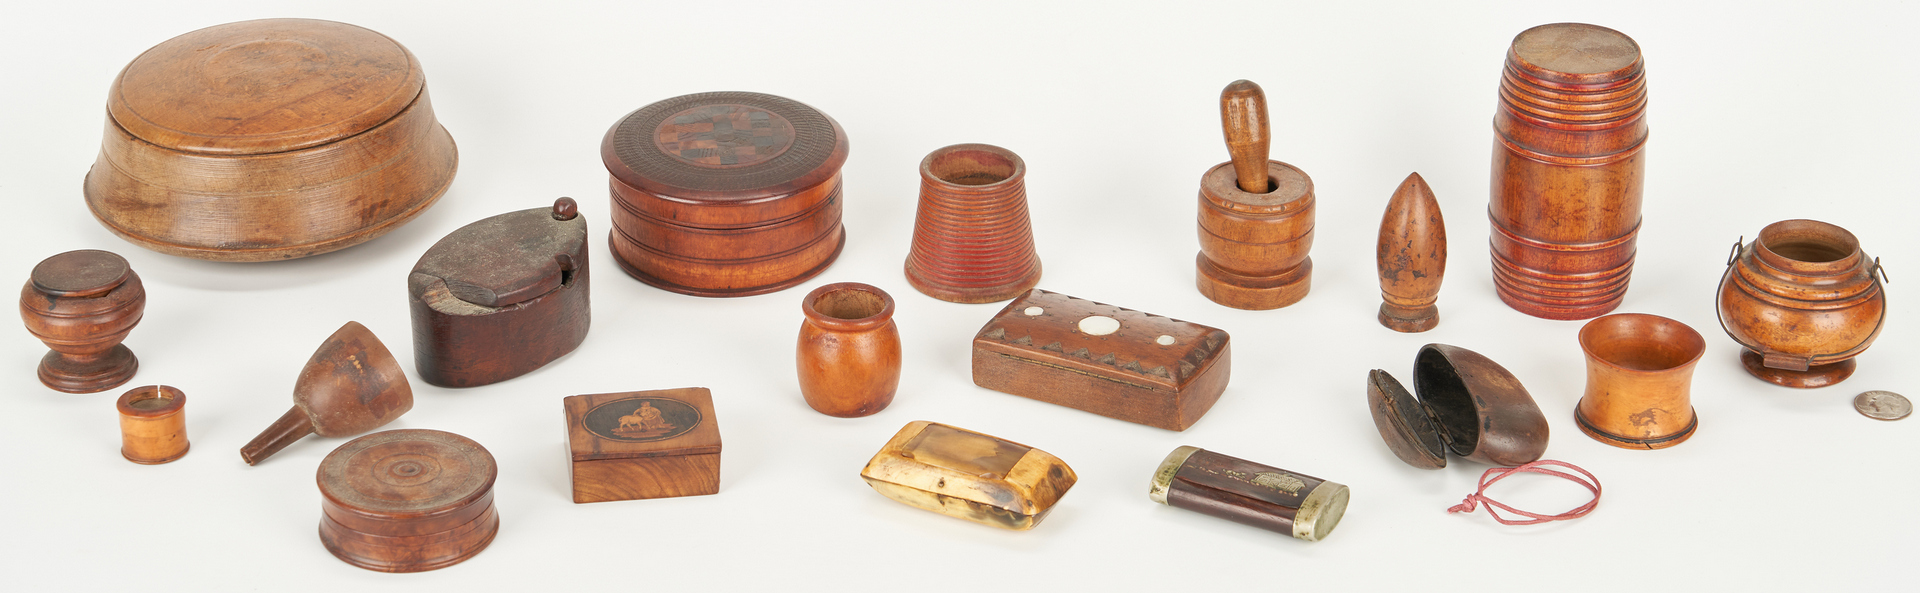 Lot 386: 19 Assorted Items: Treenware, Spice Boxes & Snuff Boxes plus 1 other